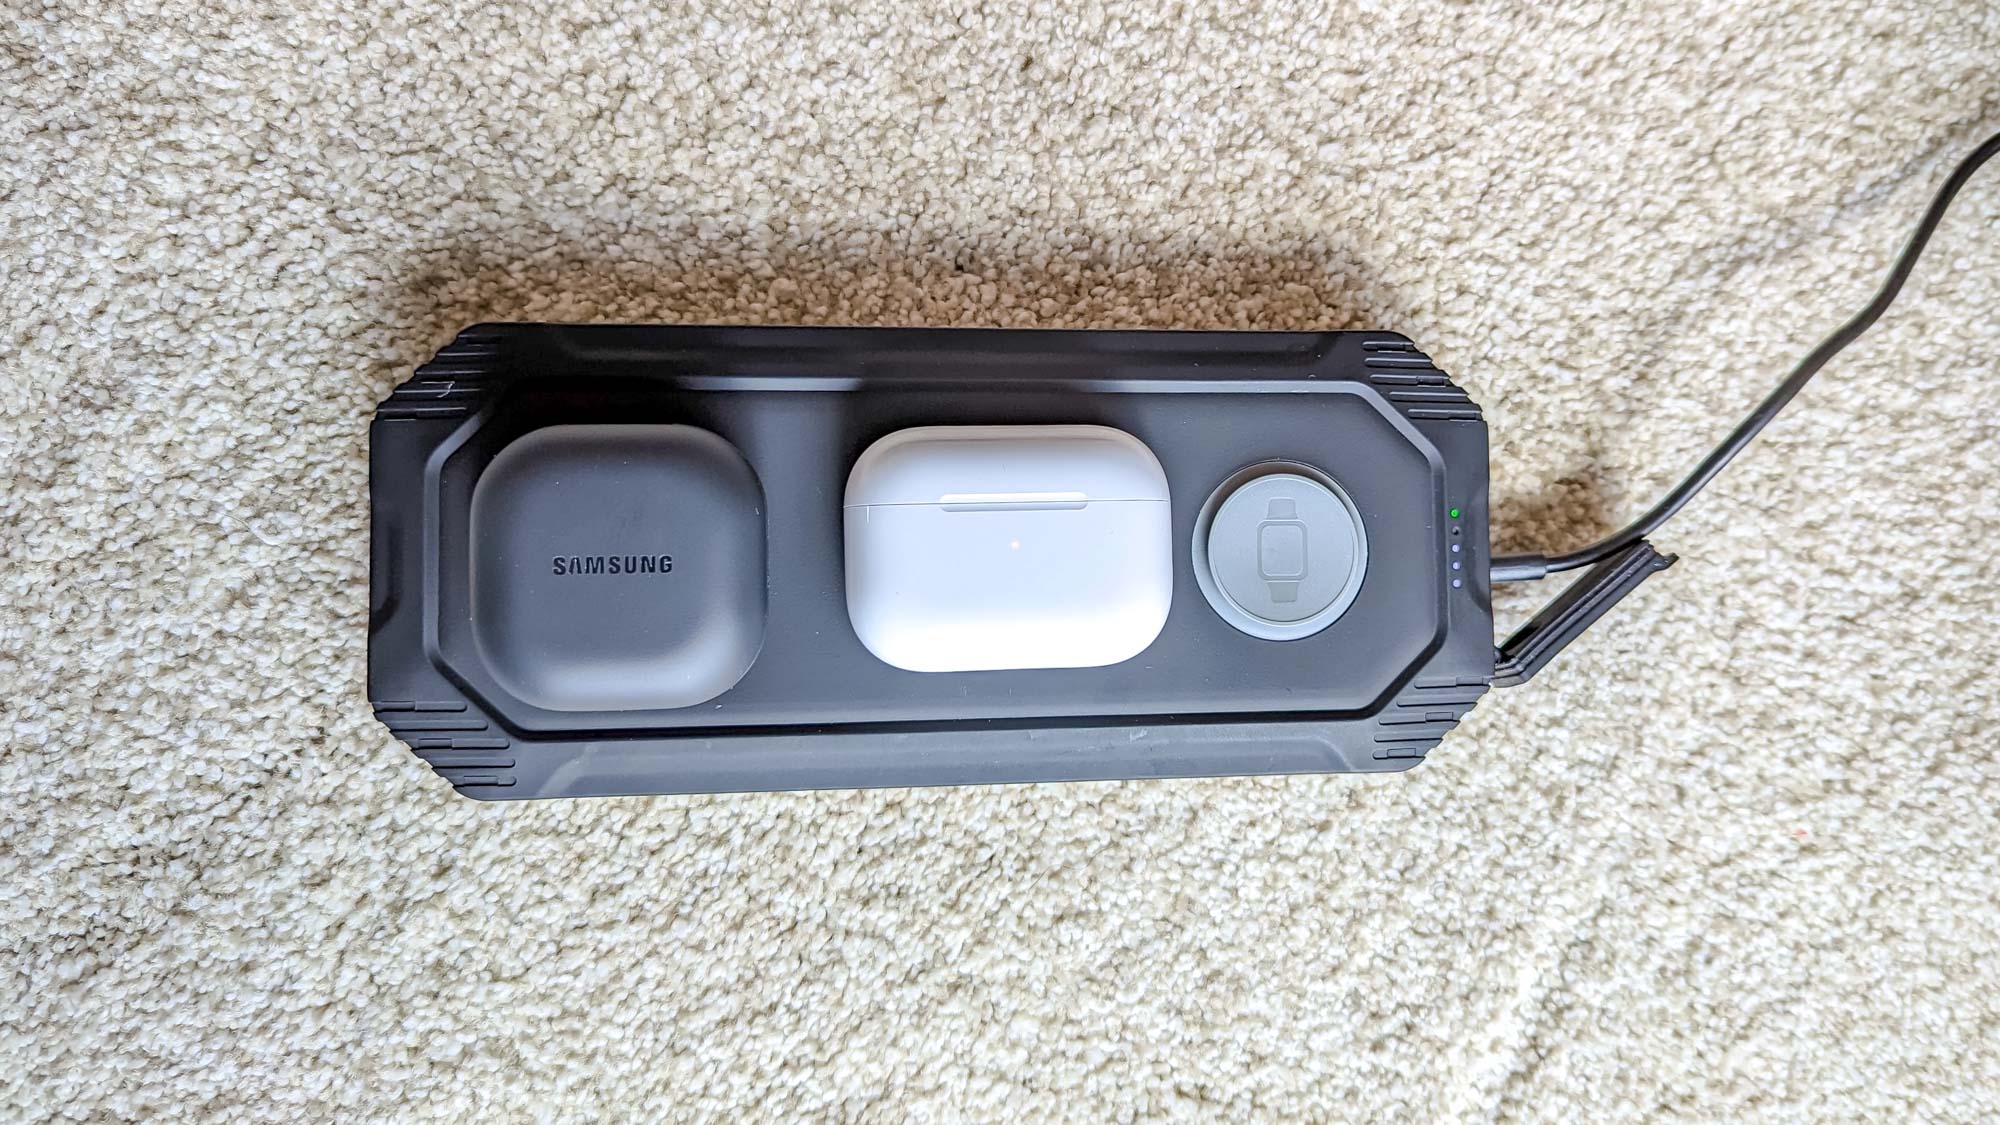 AirPods Pro 2 and Samsung Galaxy Earbuds 2 Pro side-by-side on wireless charger on a wall outside